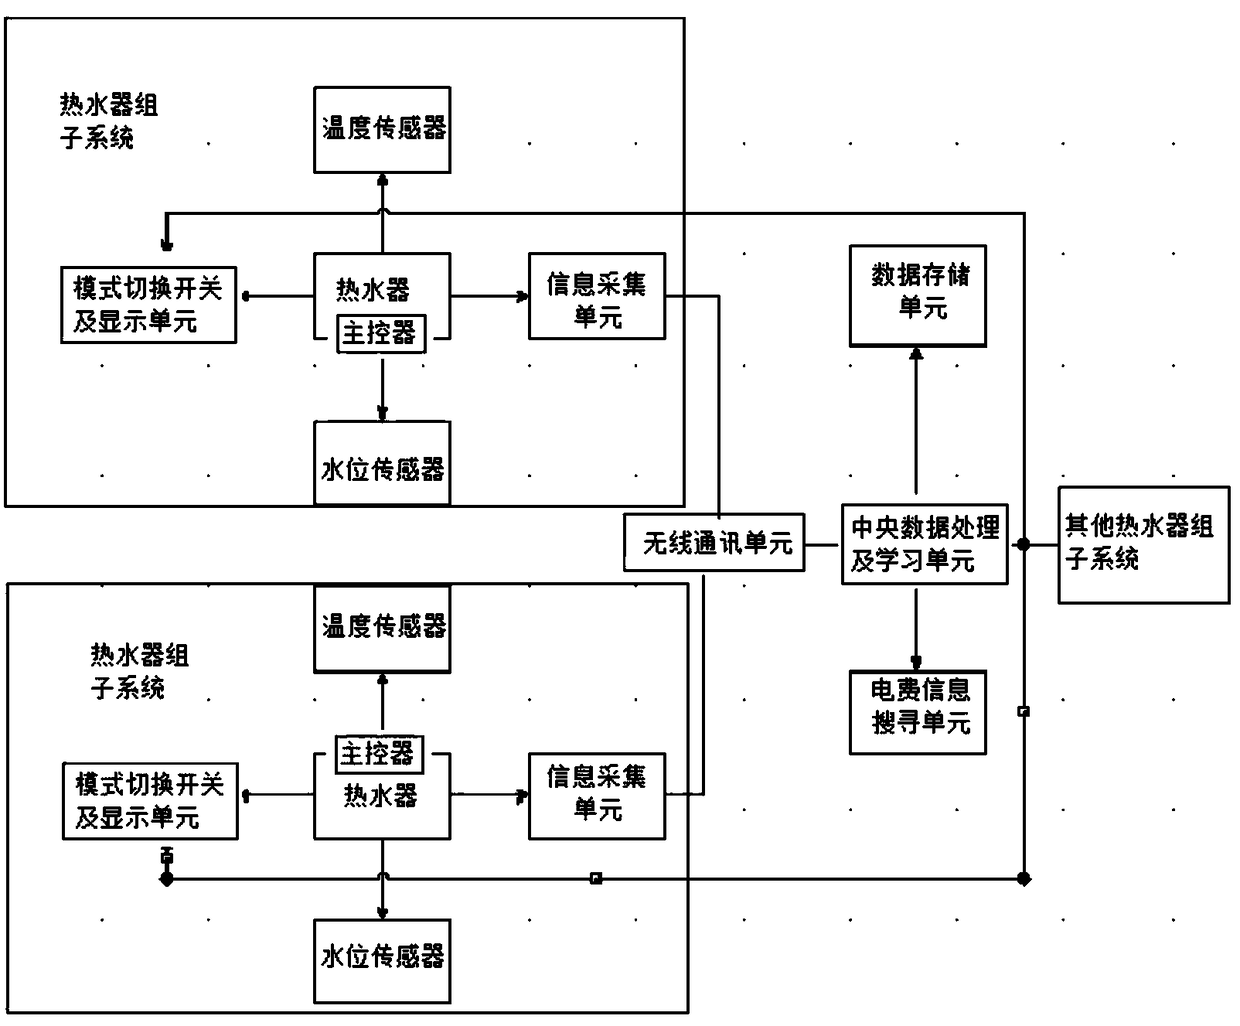 A group automatic control system for water heater groups with learning algorithm in buildings